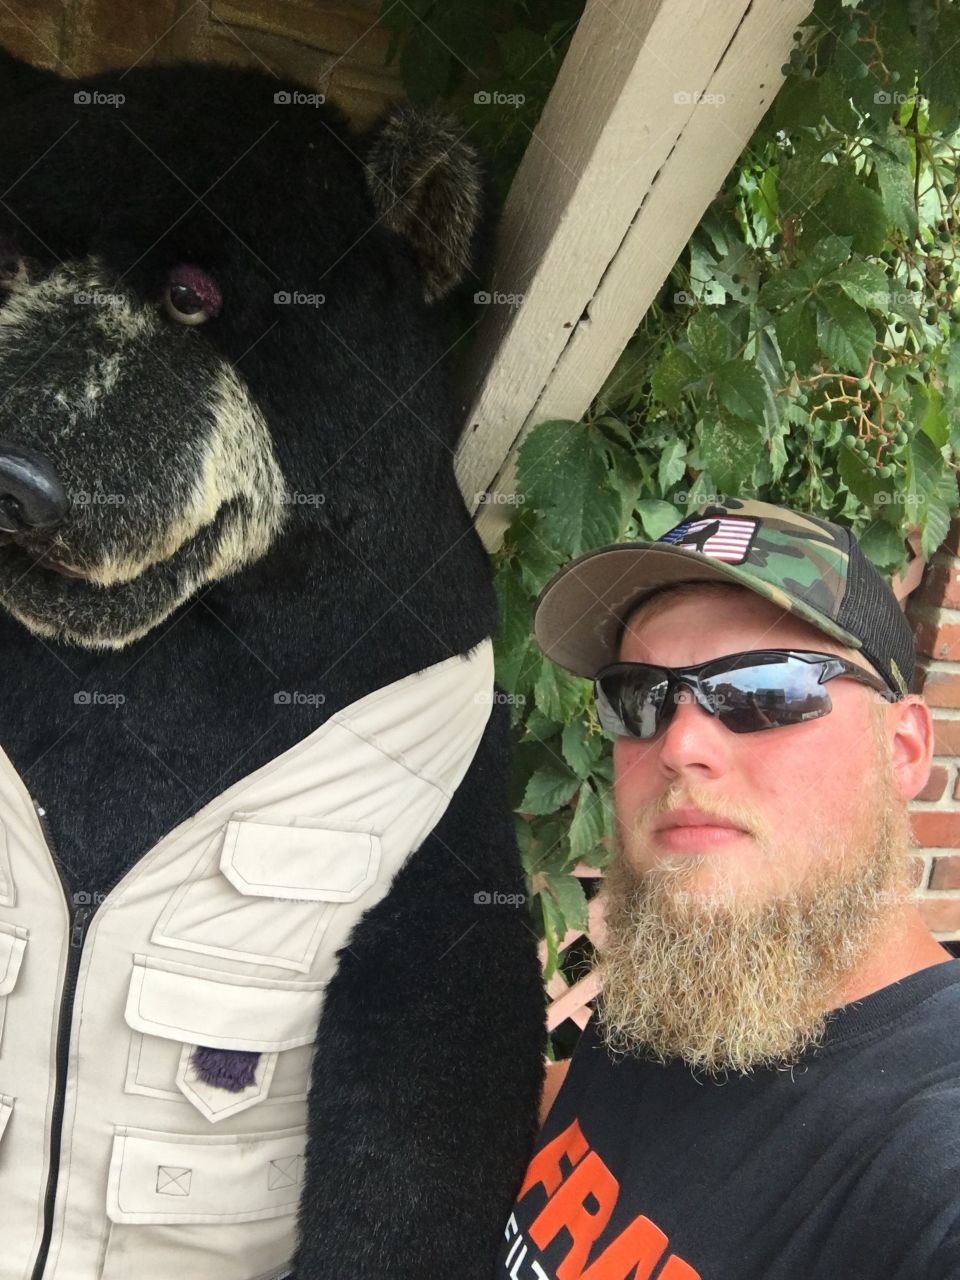 Just a bearded man and a black bear, in a vest.